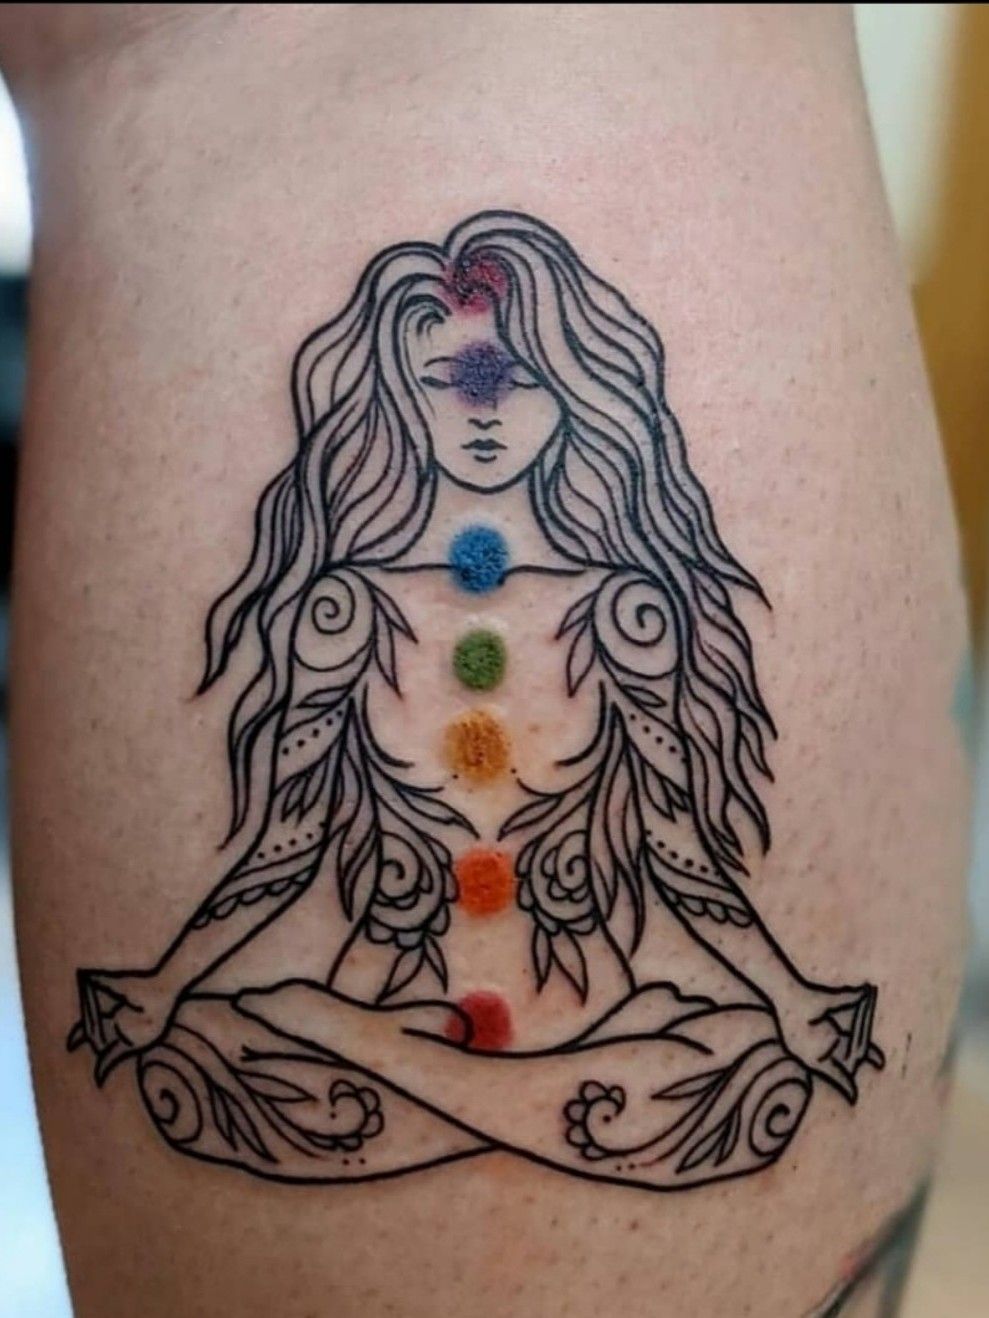 Hey everyone , was wondering if anyone could help me find the origin behind  this tattoo or if it's personal : r/tattoo